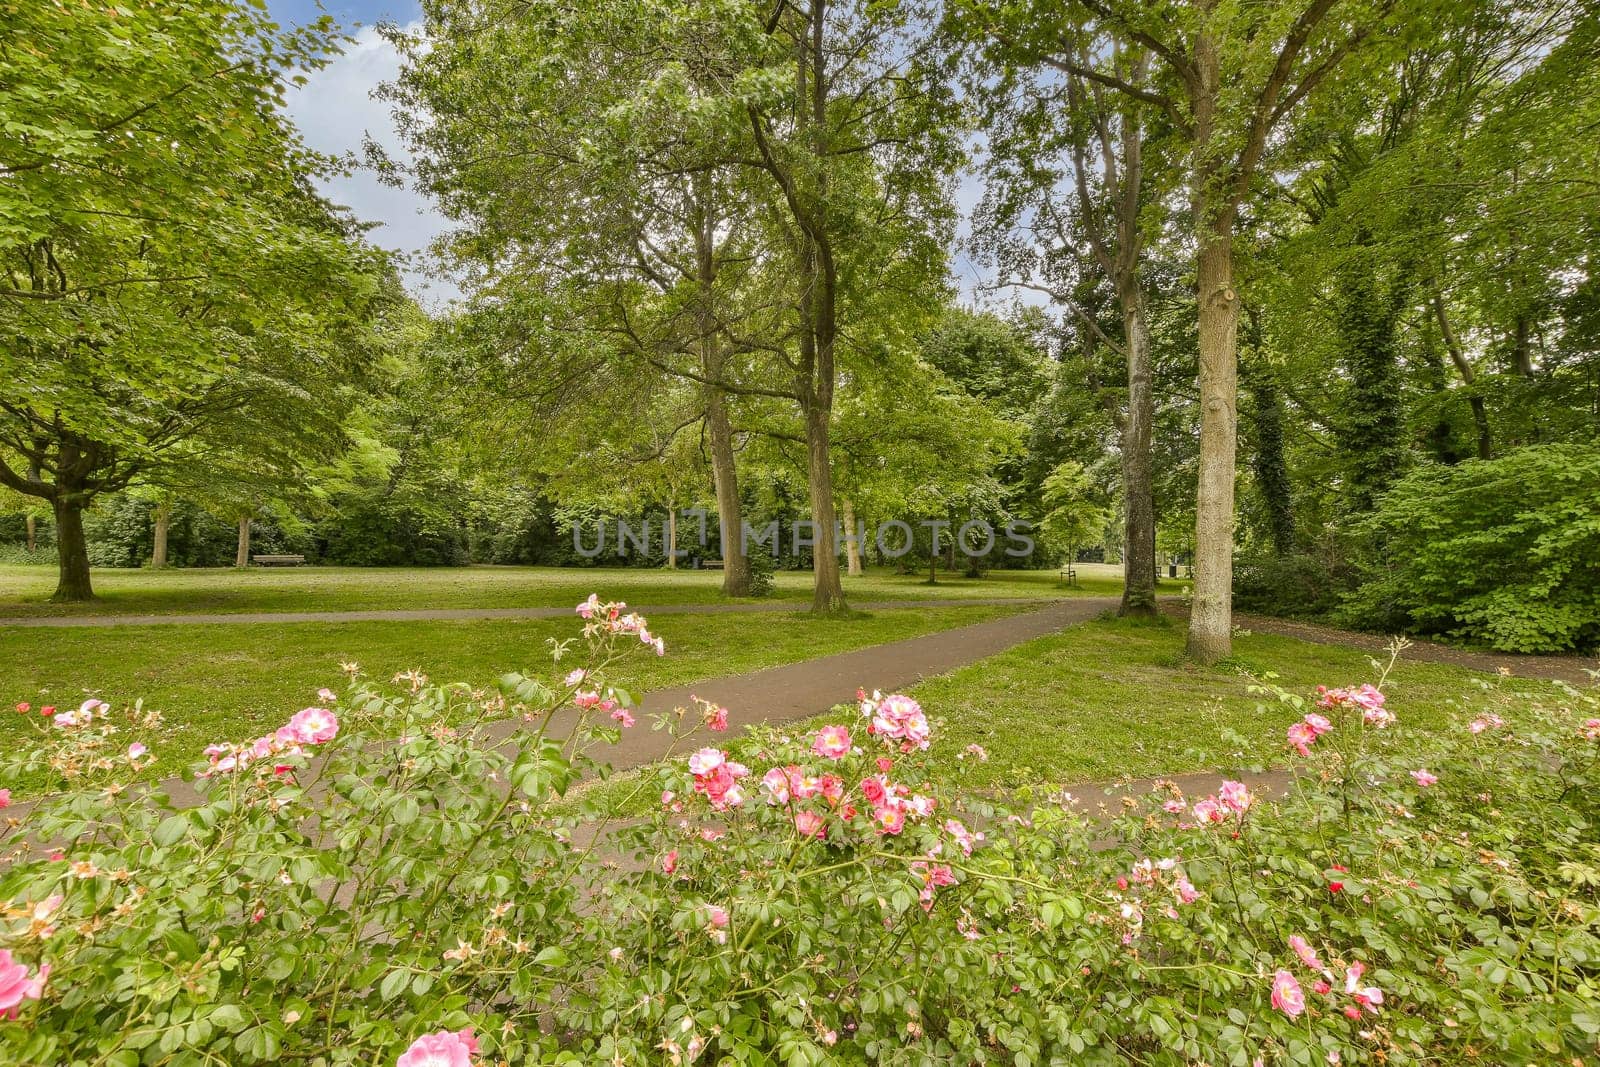 some pink flowers in the middle of a park with trees and green grass on either side, there is a paved path leading to